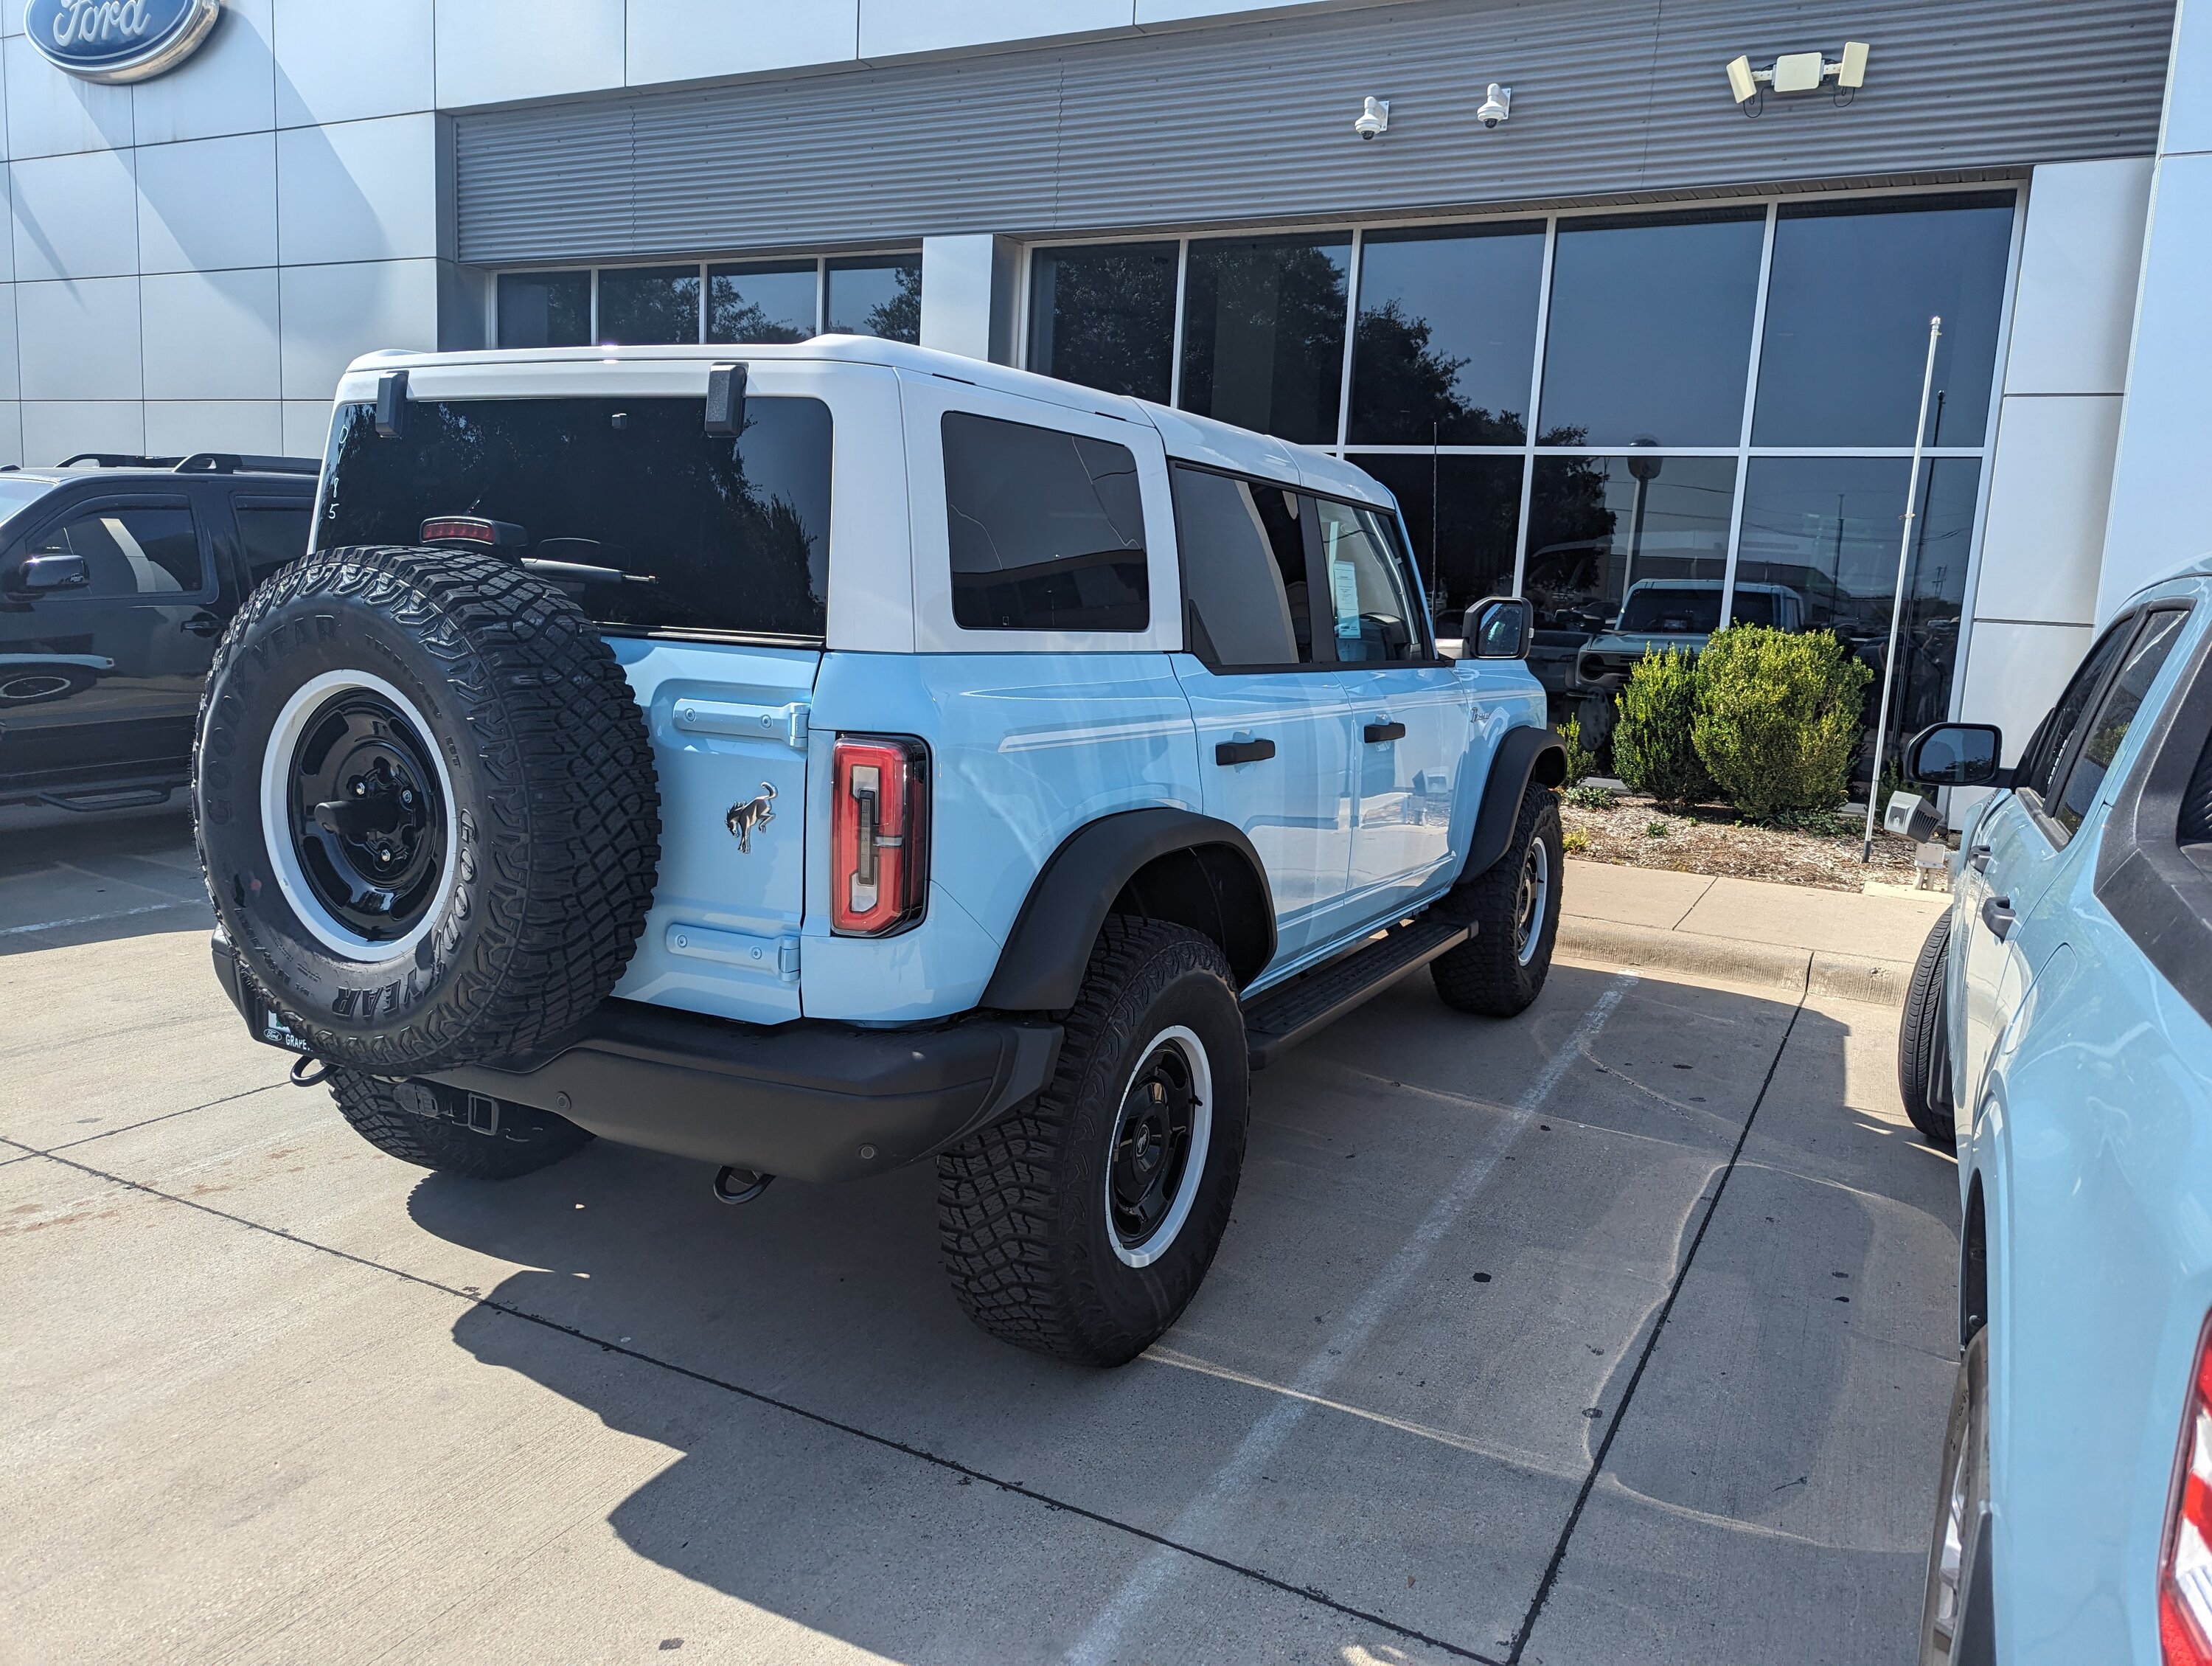 Ford Bronco Robin's Egg Blue Heritage Limited Bronco eye candy PXL_20230727_214731076